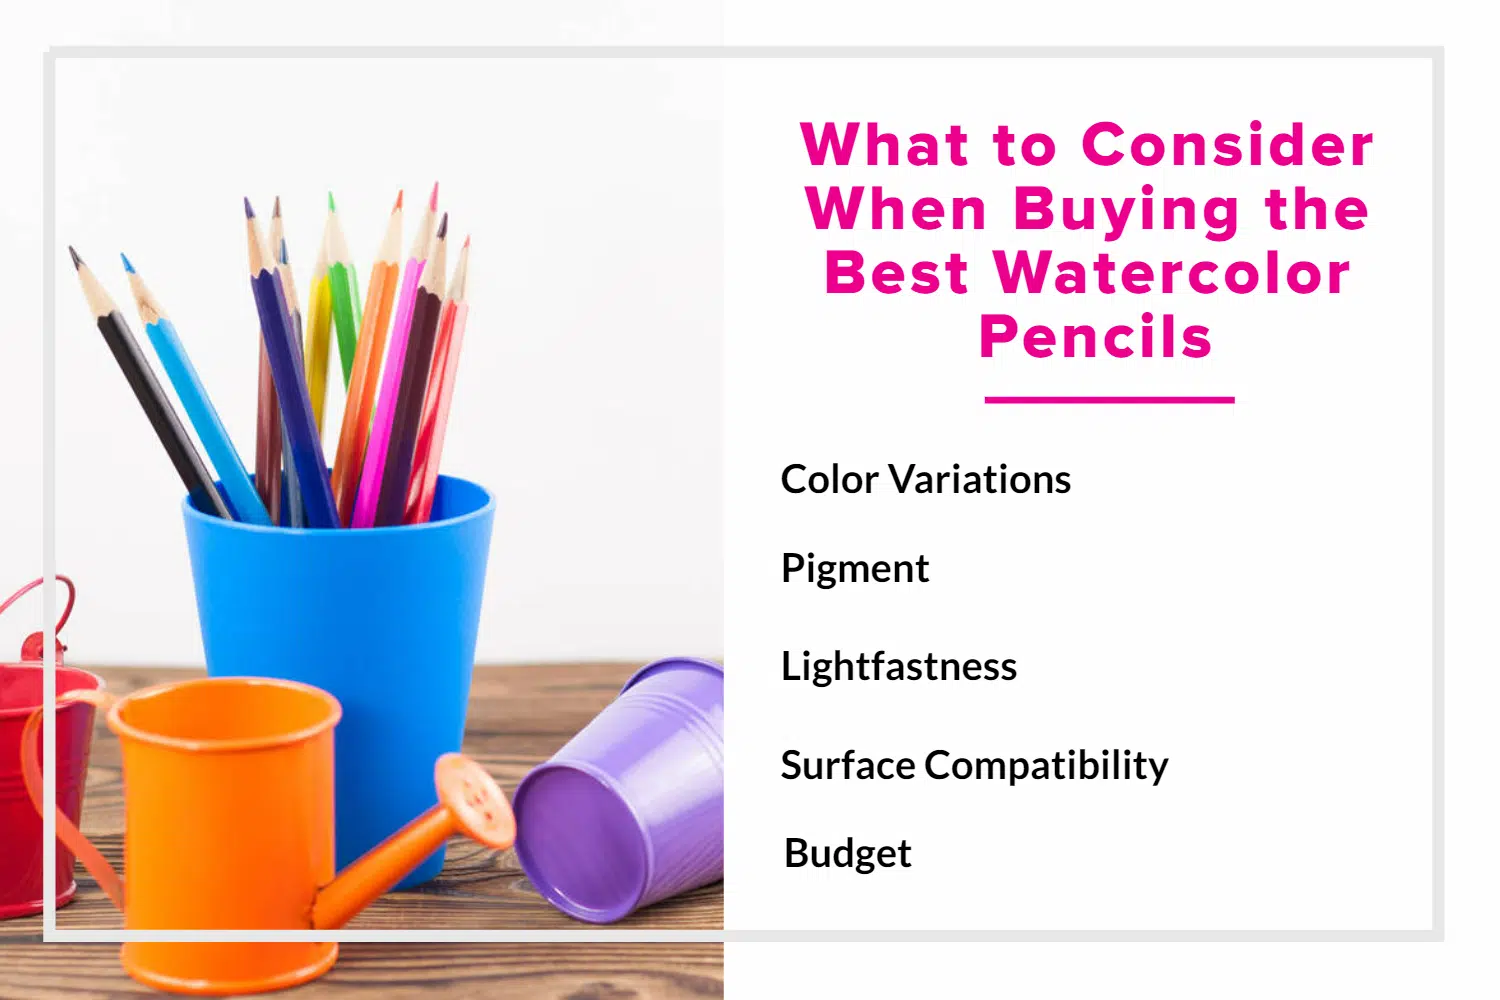 https://justcreative.com/wp-content/uploads/2021/10/What-to-Consider-When-Buying-the-Best-Watercolor-Pencils.png.webp